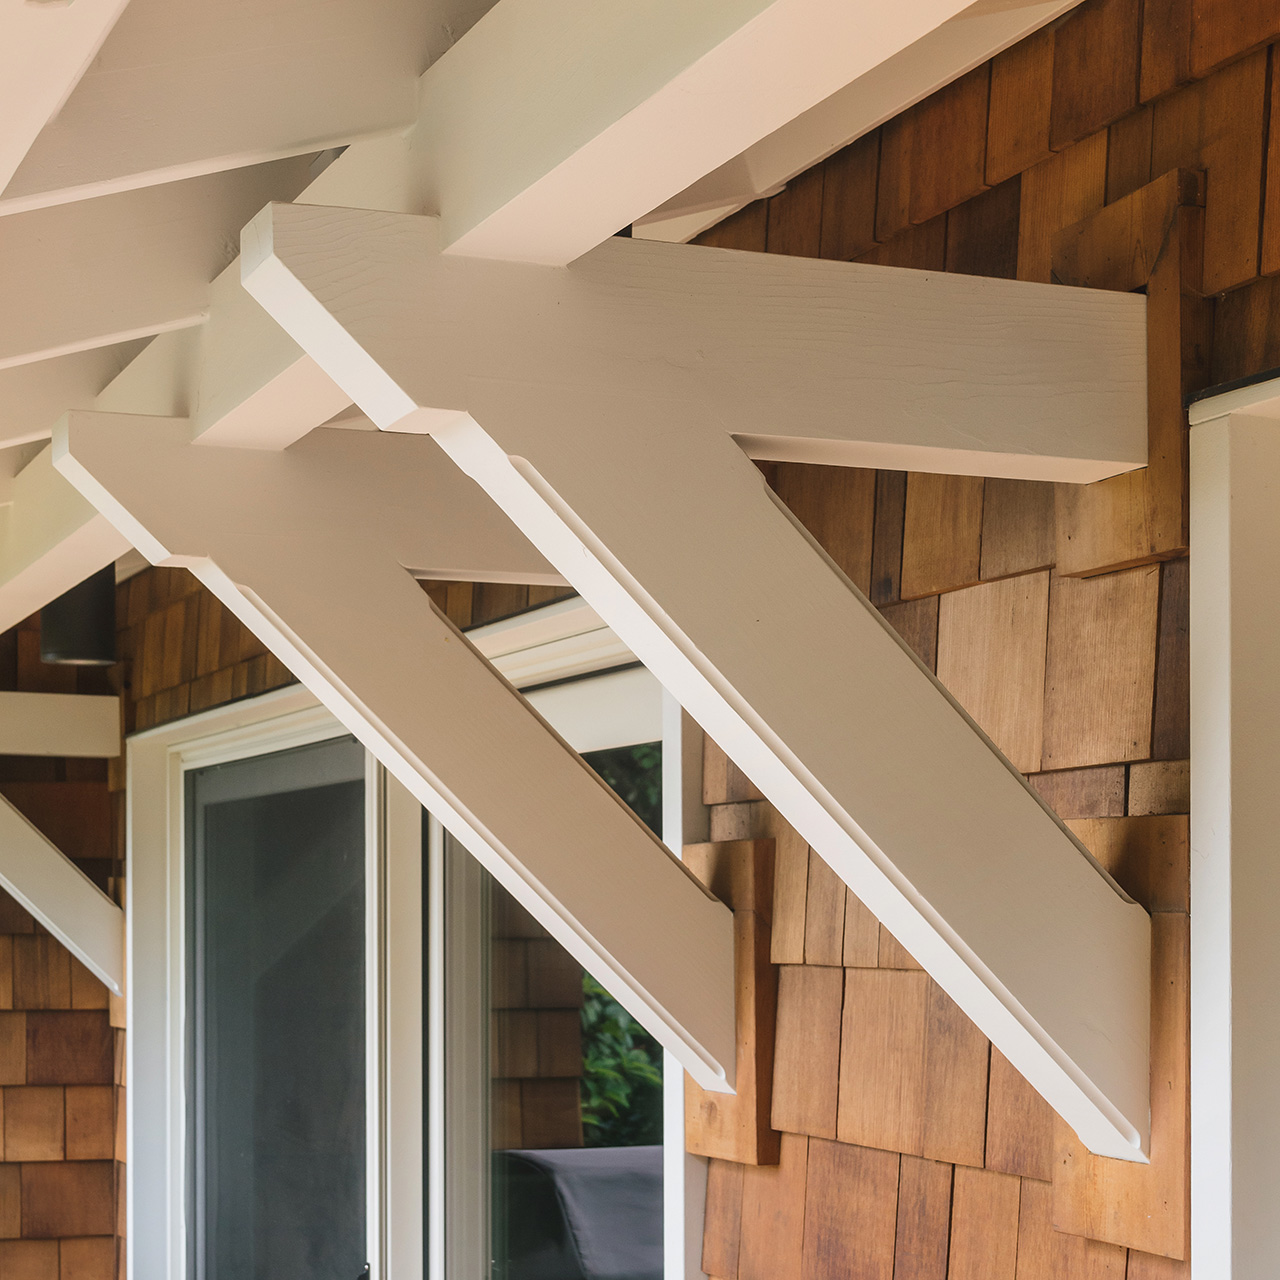 Custom wood brackets support a canopy over the sliding glass doors at the rear of the Hillside House.